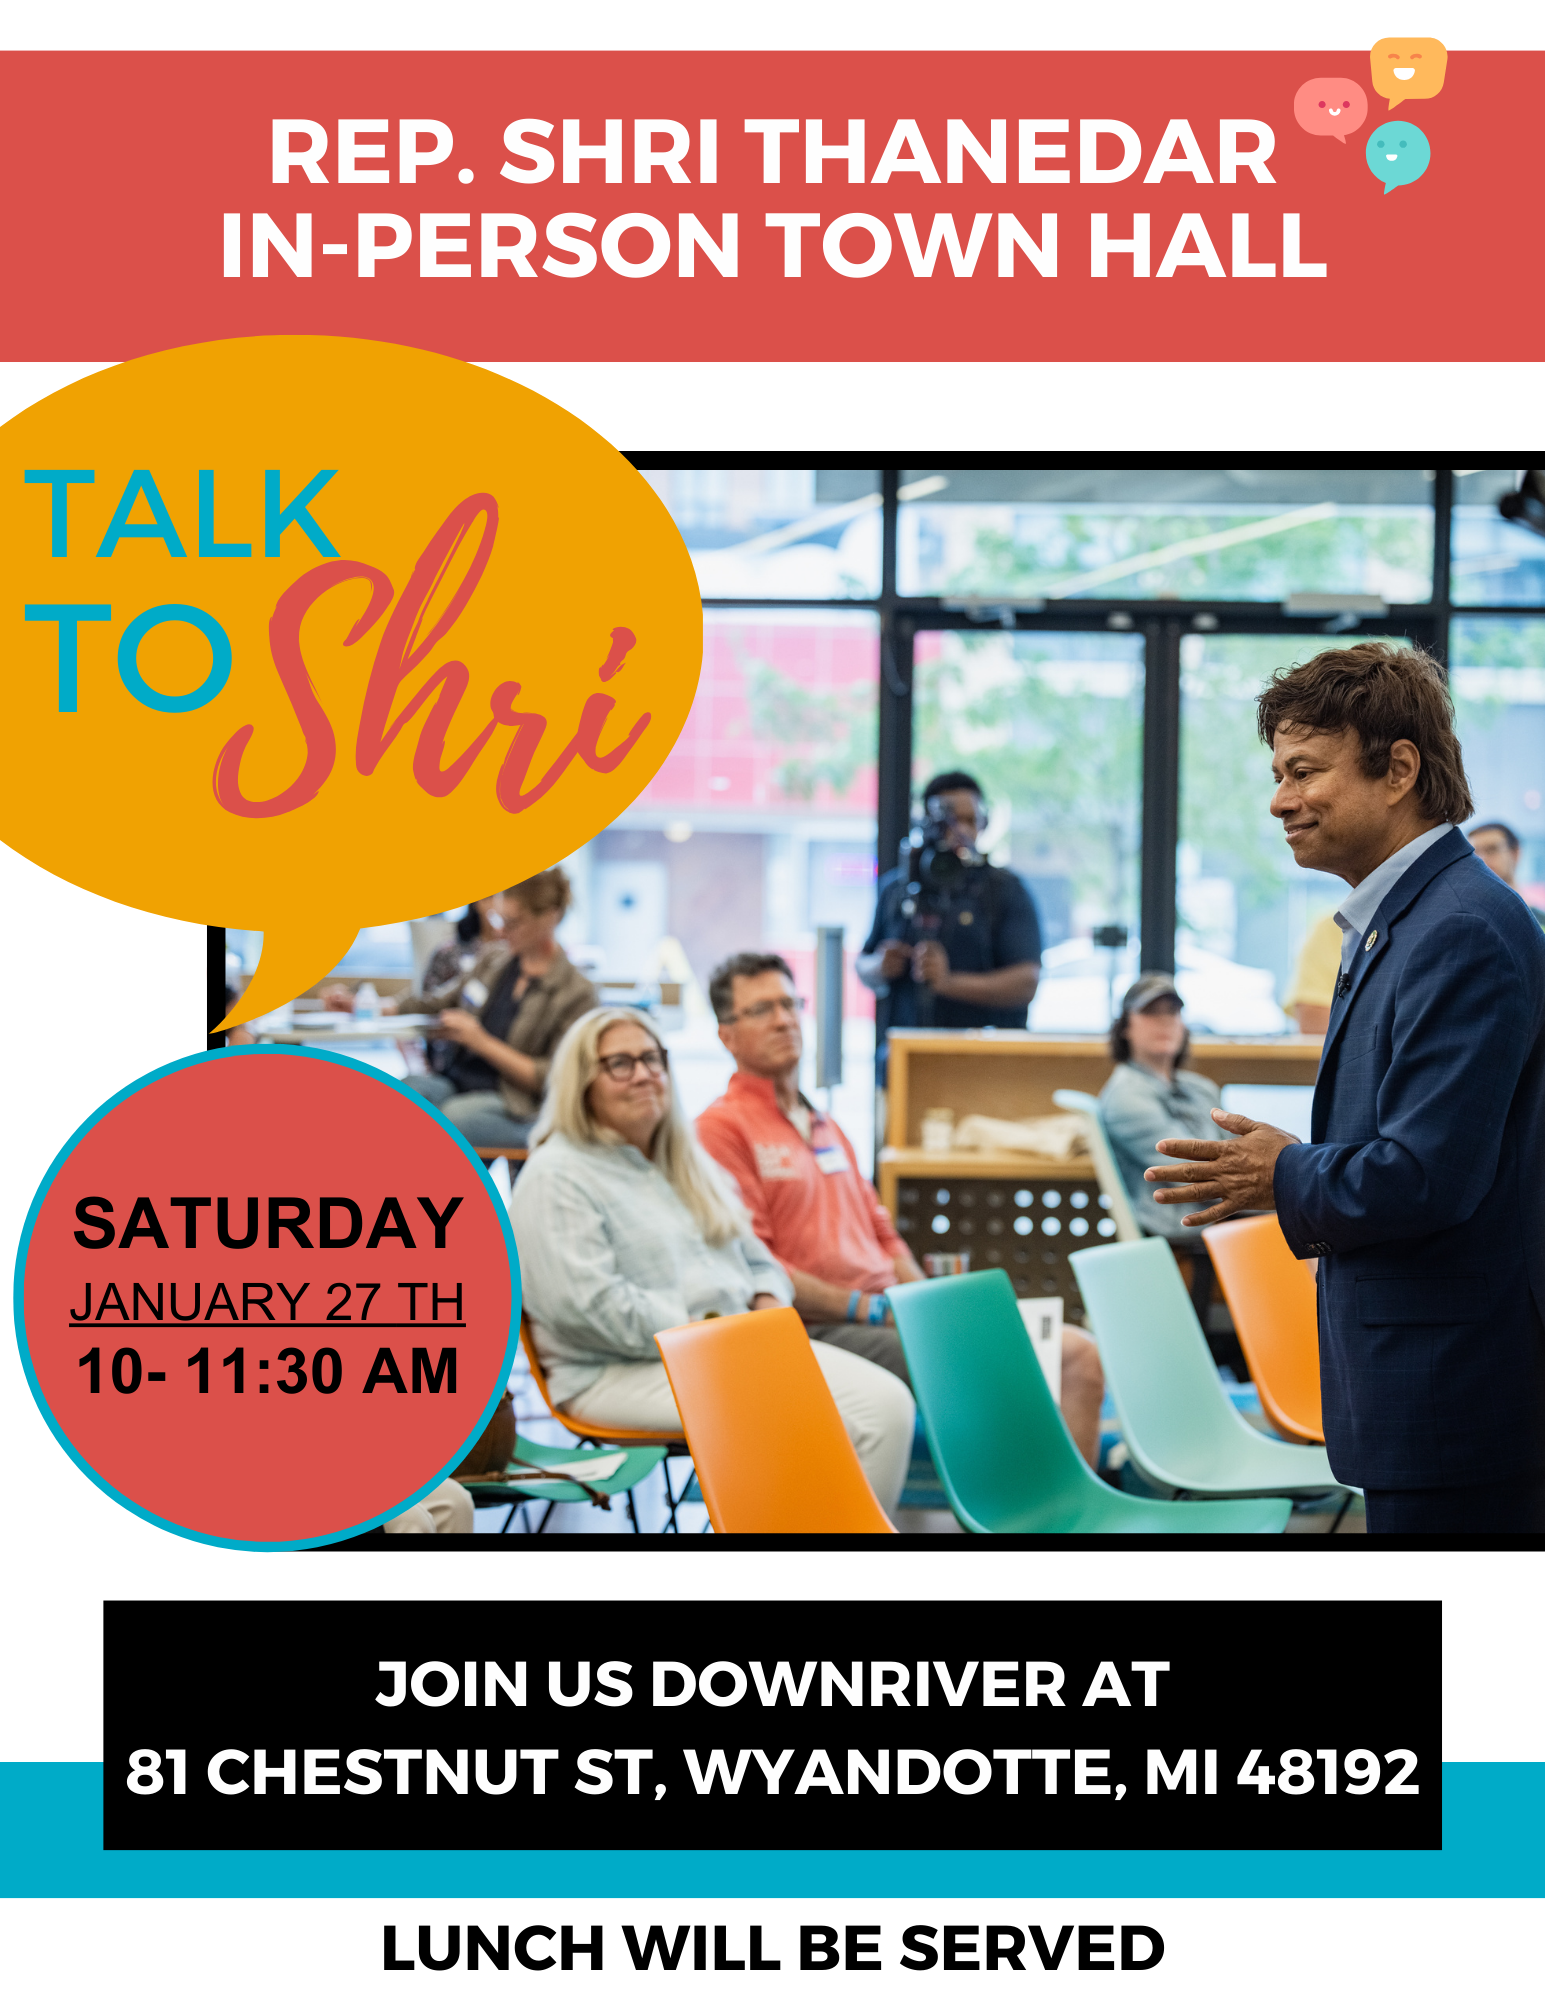 In Person Downriver Town Hall